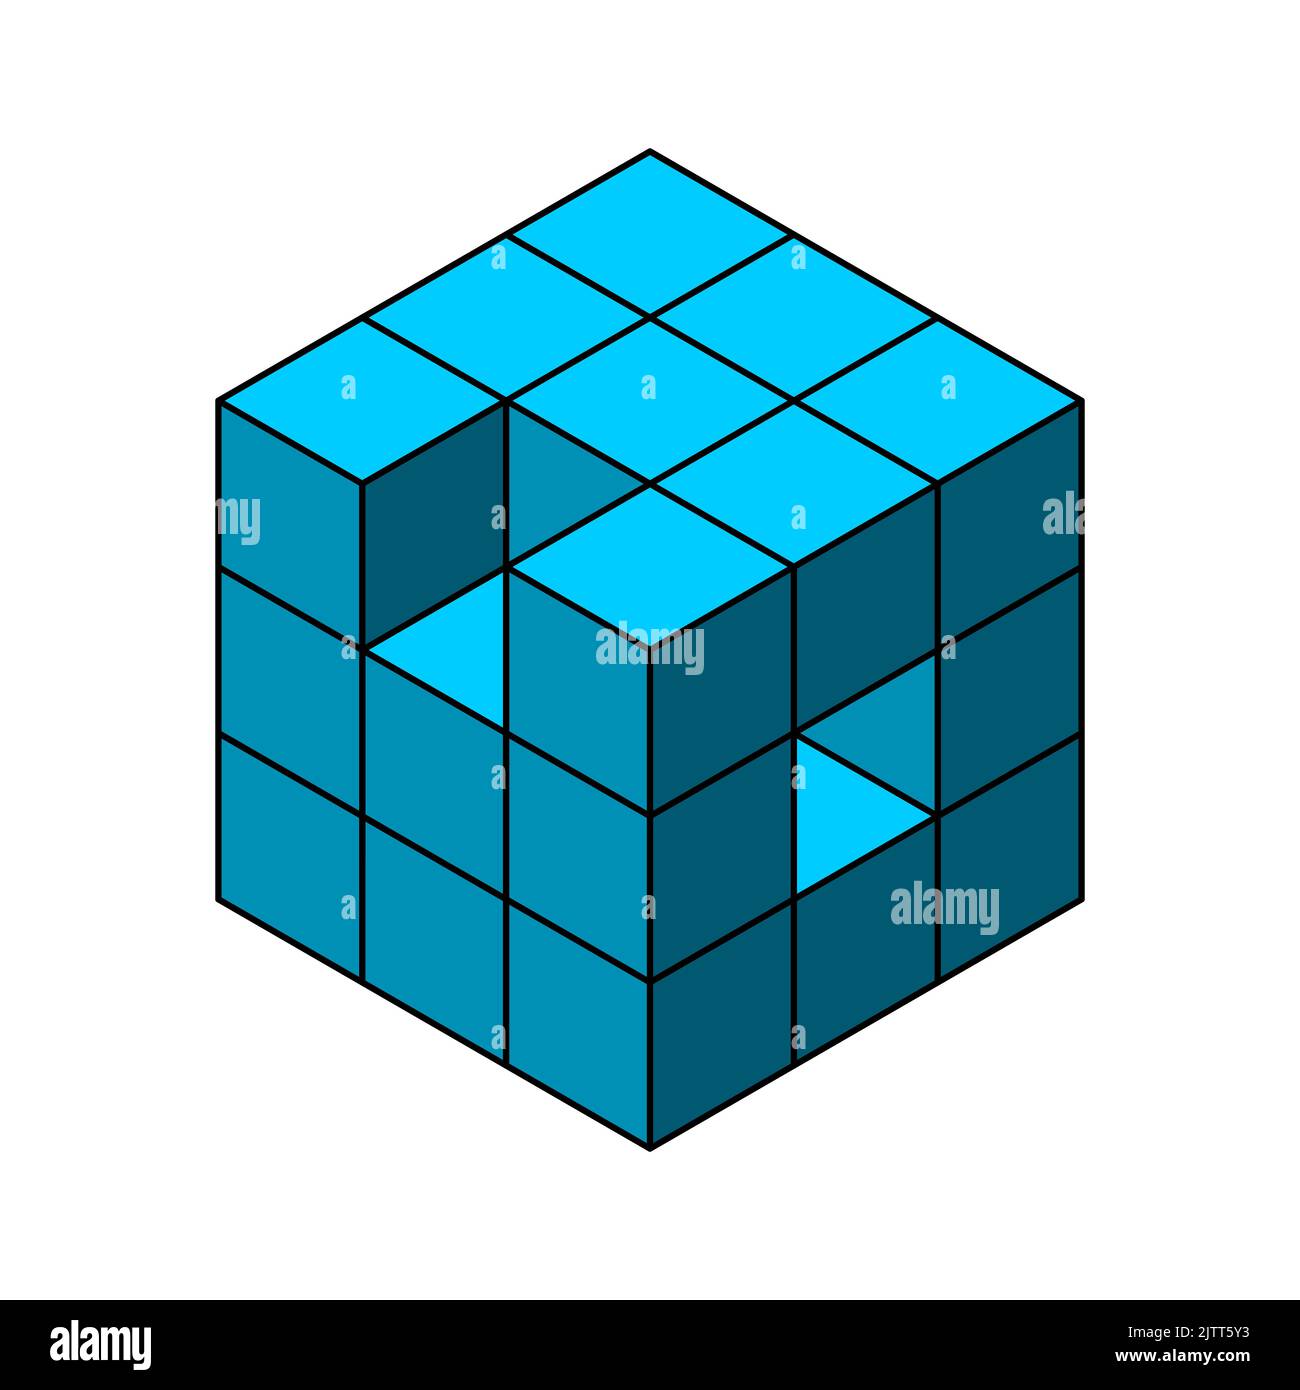 3D cube with outline. Missing piece concept. Geometric object made of boxes with two elements detached. Logic puzzle game. Problem solving concept. Stock Vector